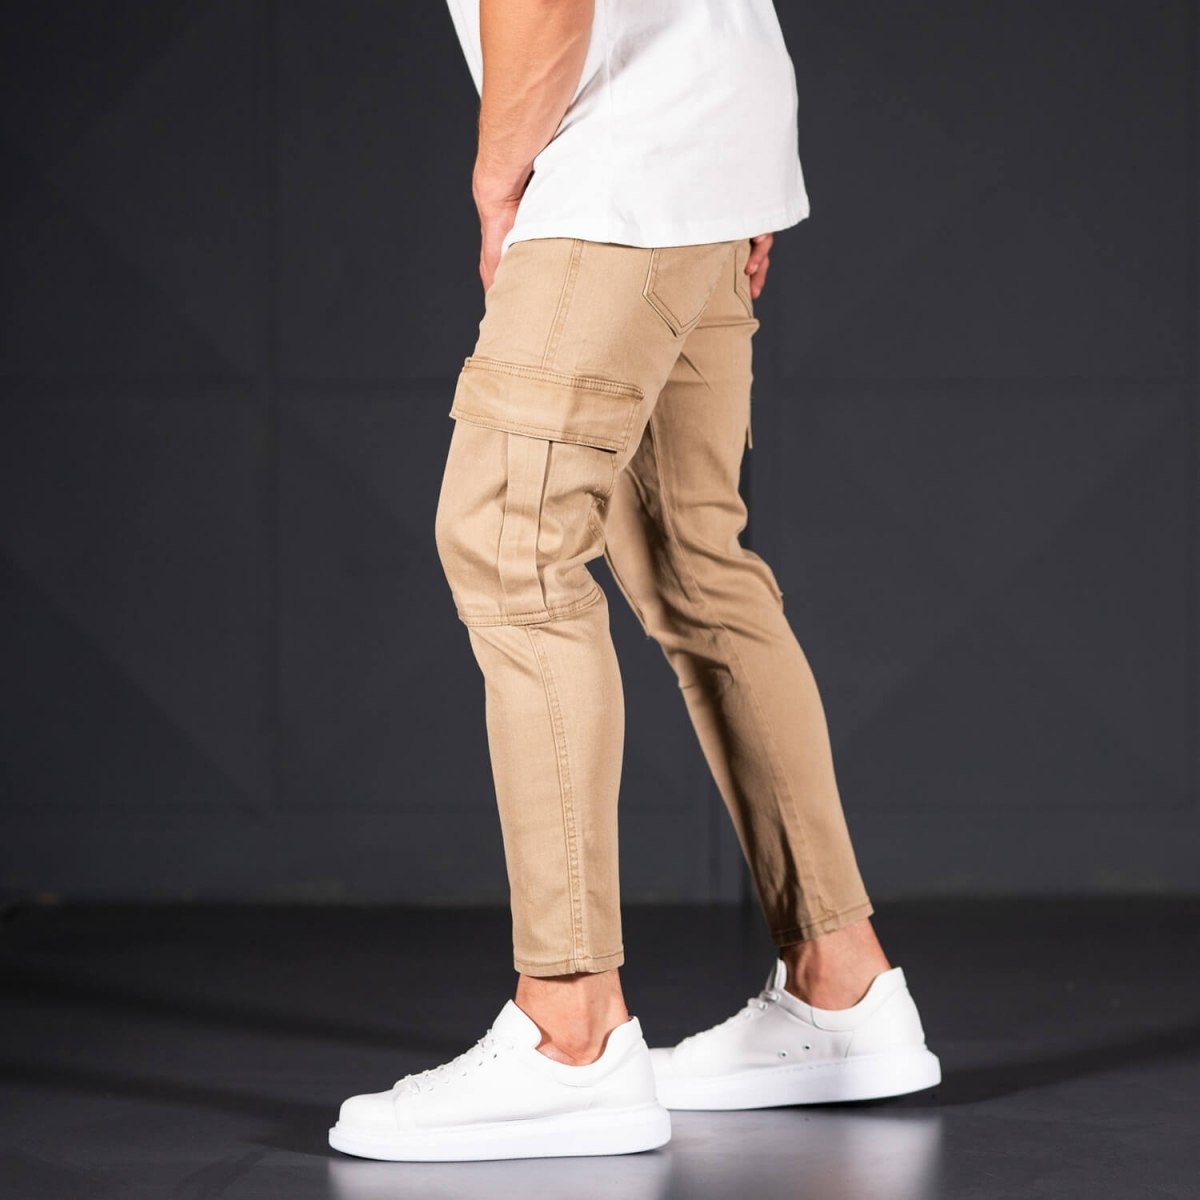 Men's Jeans with Pockets Style in Camel | Martin Valen